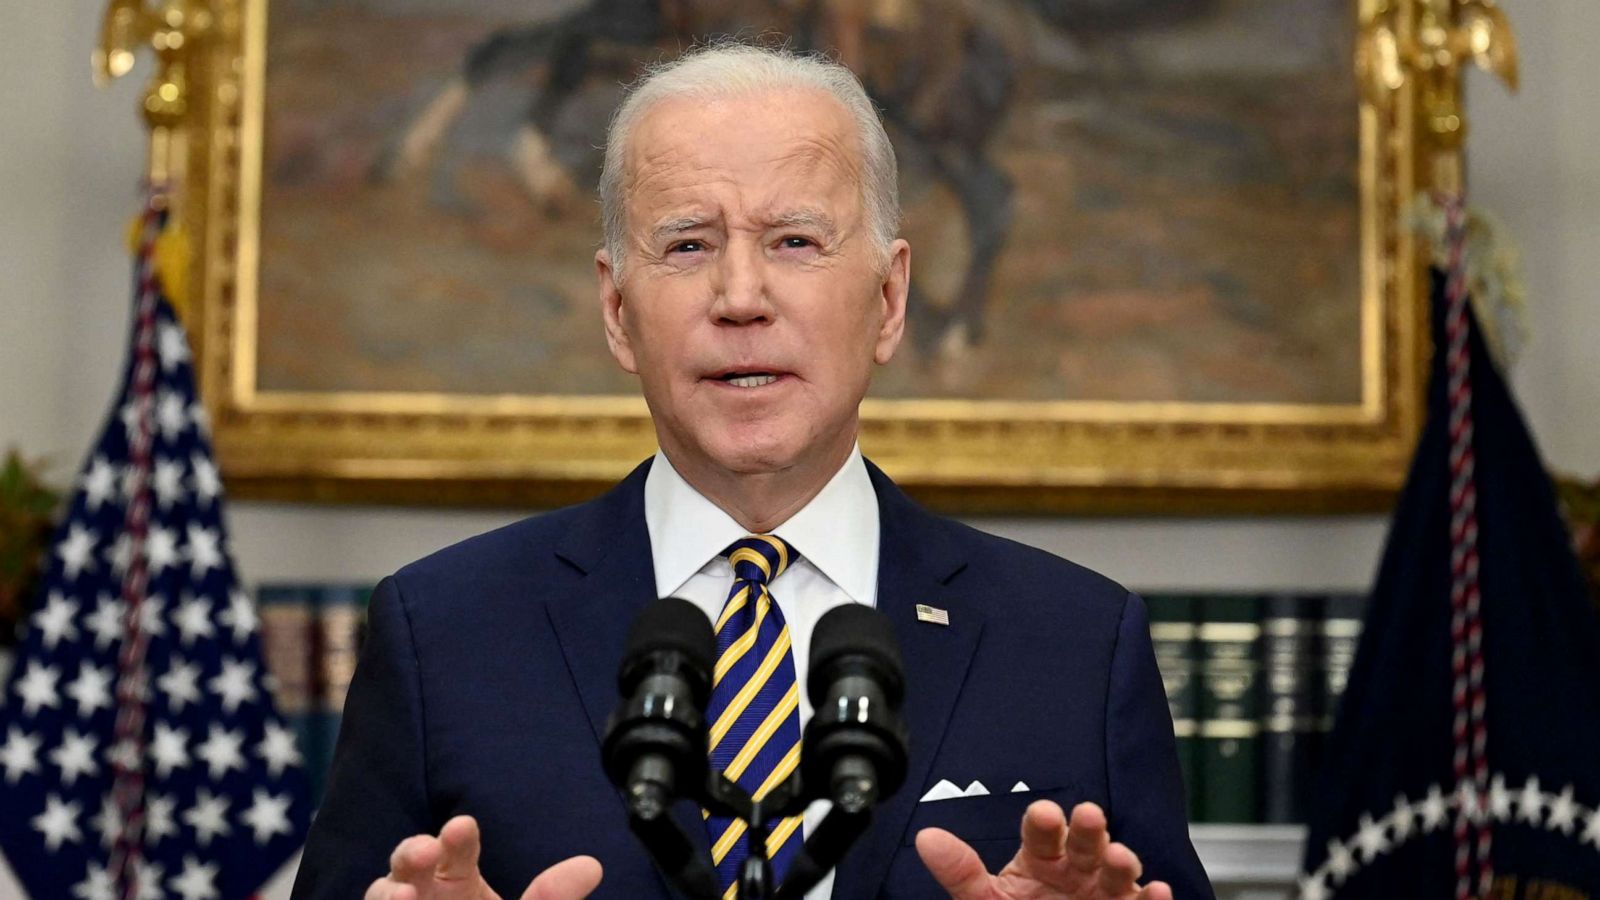 Biden announces ban on Russian oil imports, other energy products - ABC News